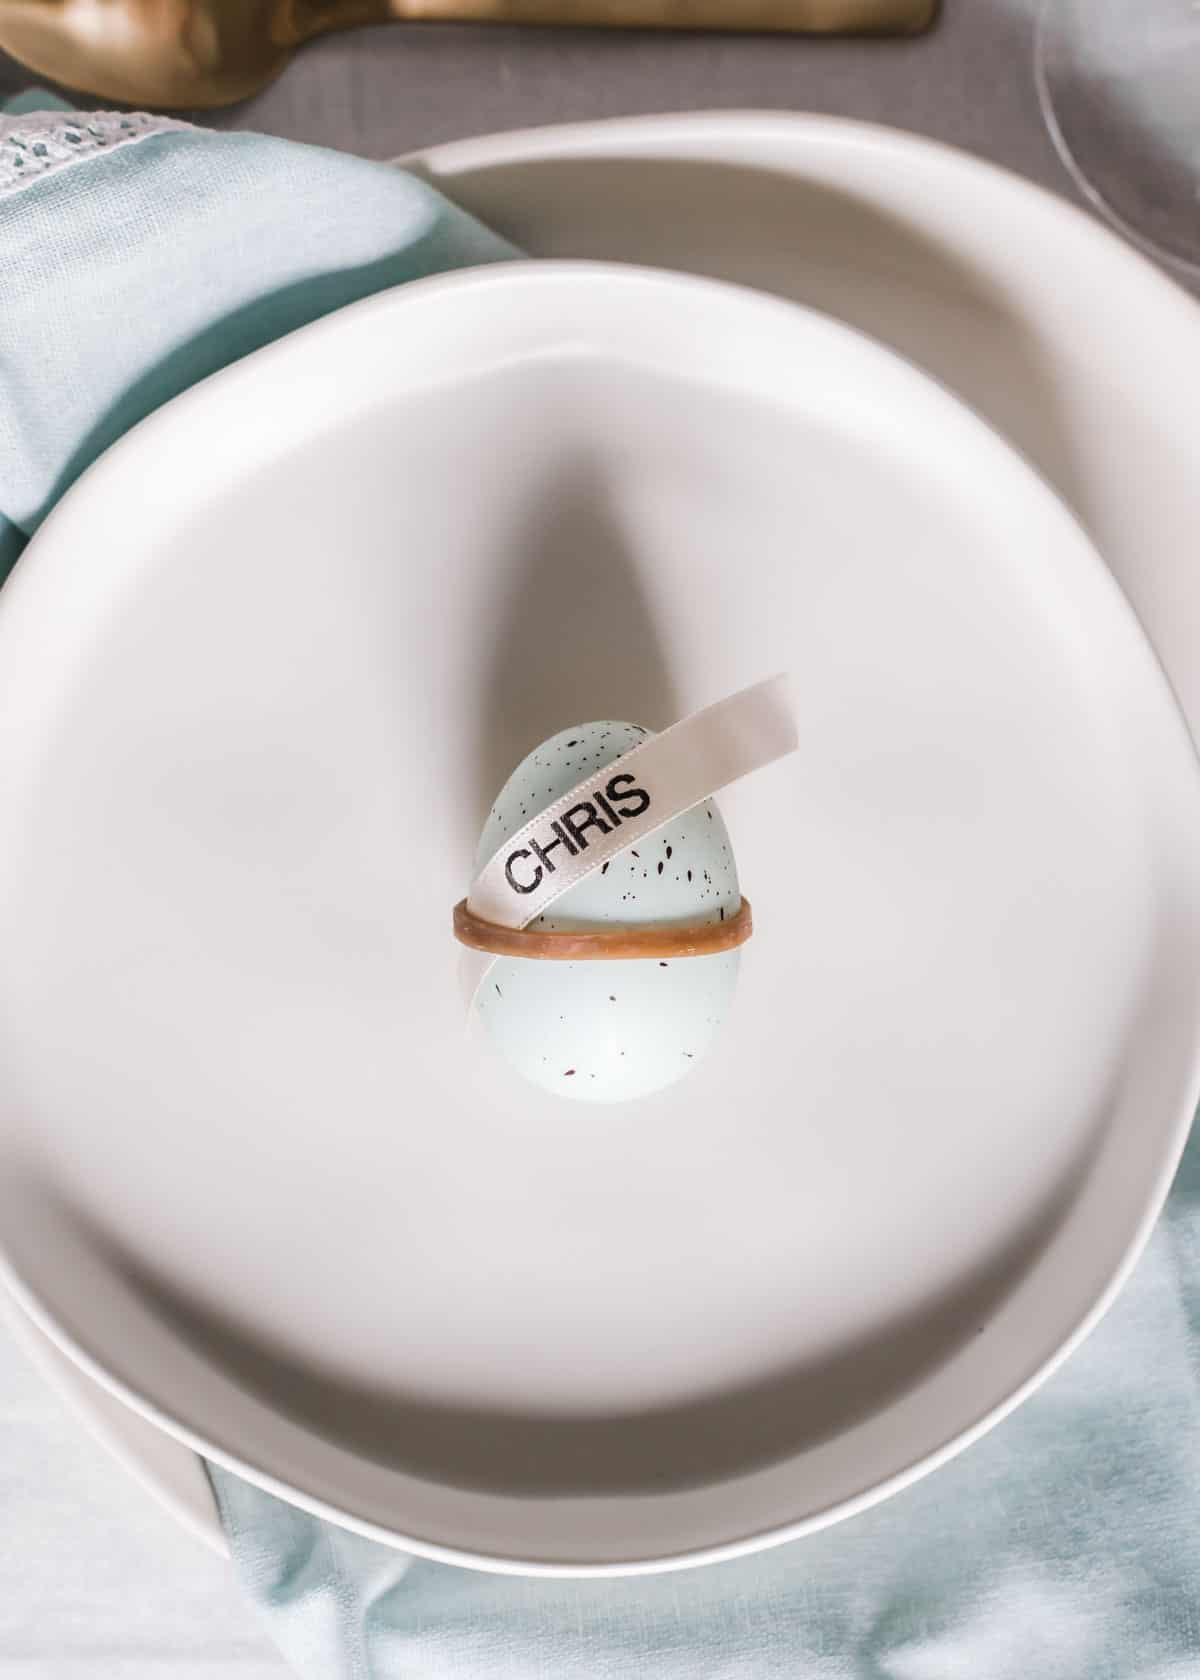 simple egg place card with rubber band around Easter egg and ribbon with name on it tucked into band, on plate.